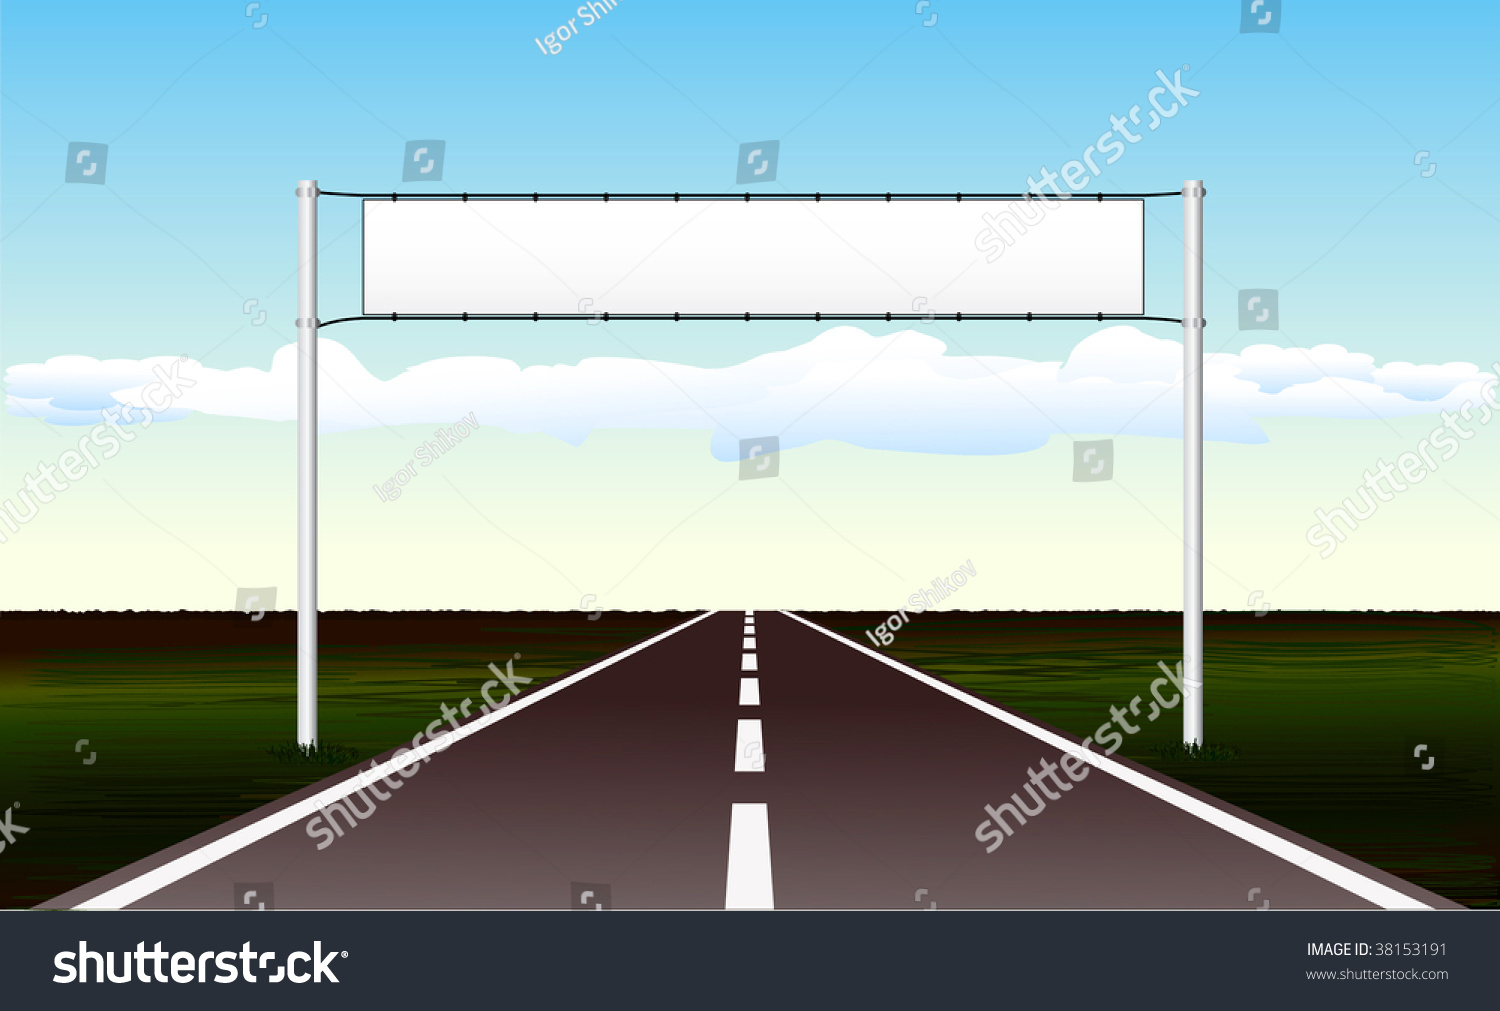 Vector Road With Blank Banner - 38153191 : Shutterstock